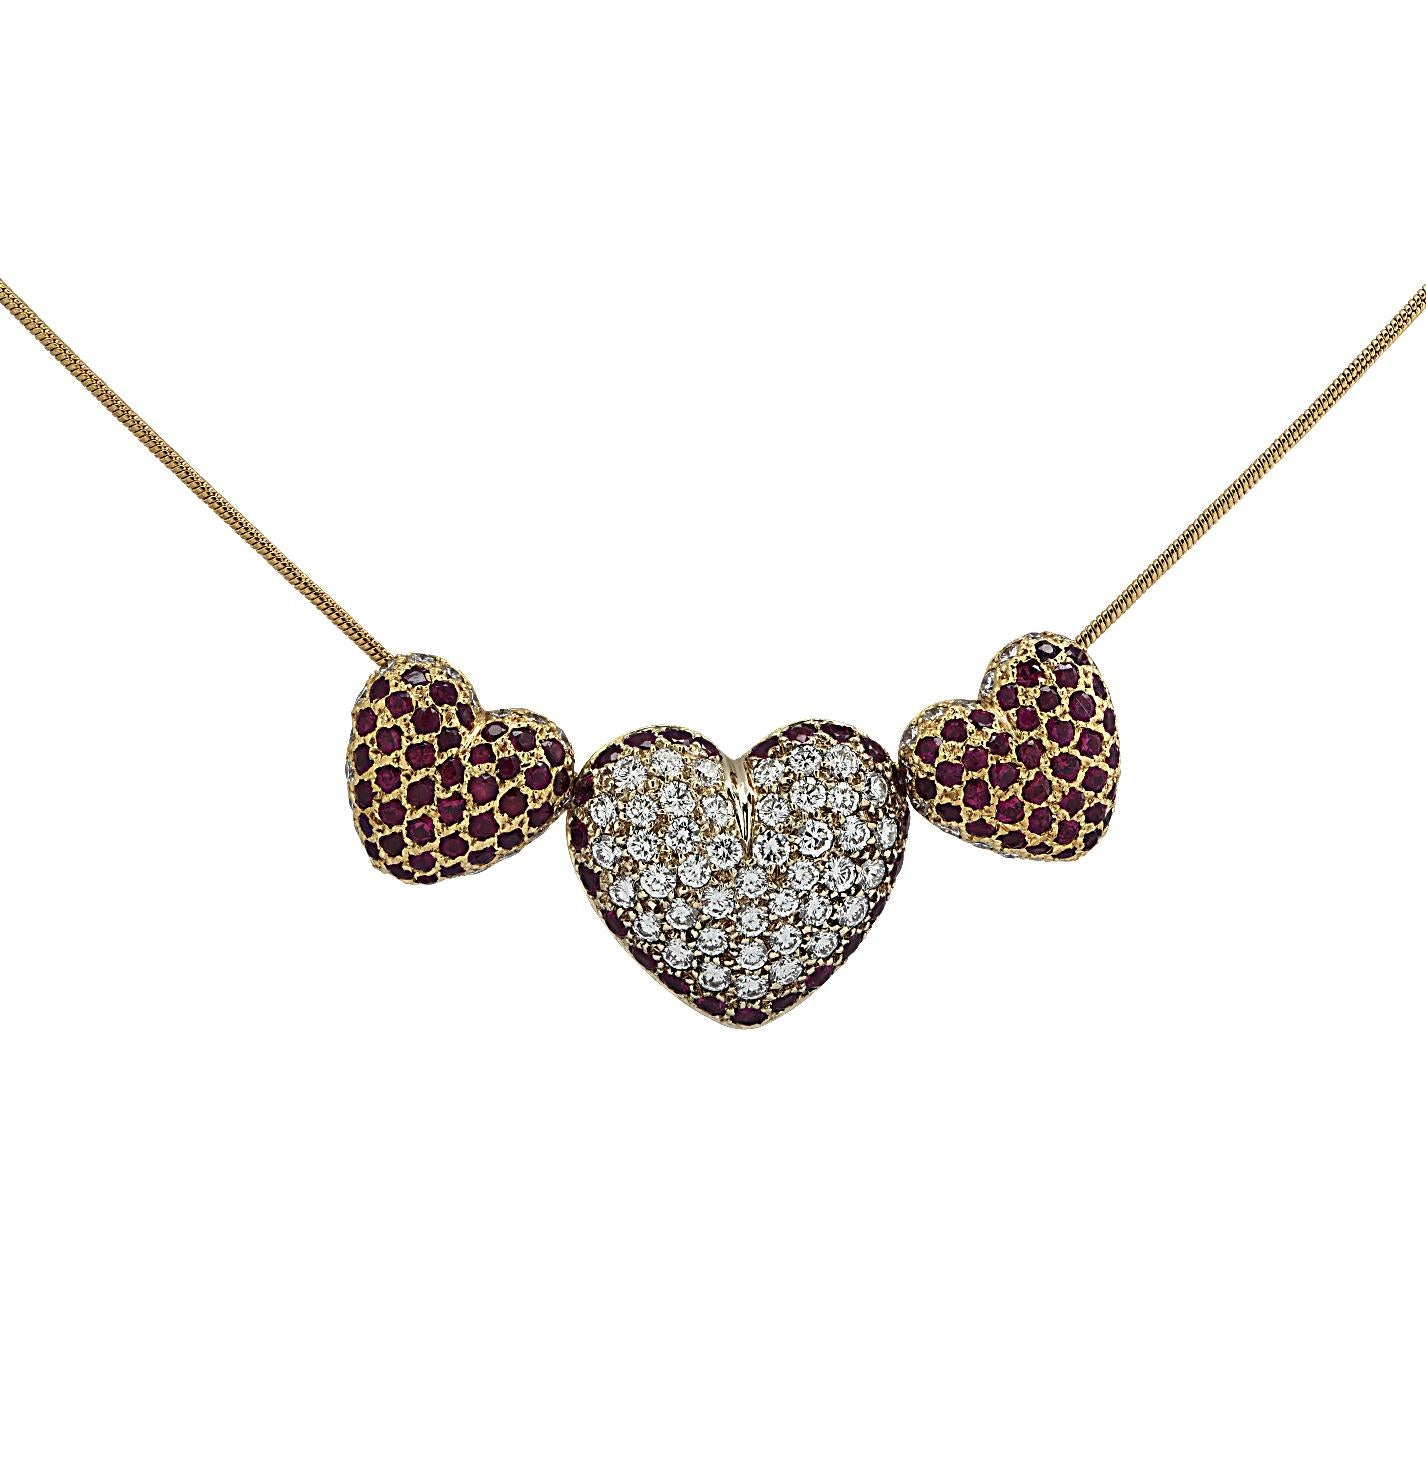 Love is in the air with this delightful necklace, crafted in 18 karat yellow gold, featuring 88 round brilliant cut diamonds weighing approximately 2.3 carats total, F-G color, VS2-SI1 clarity, and 97 rubies weighing approximately 3 carats total. A